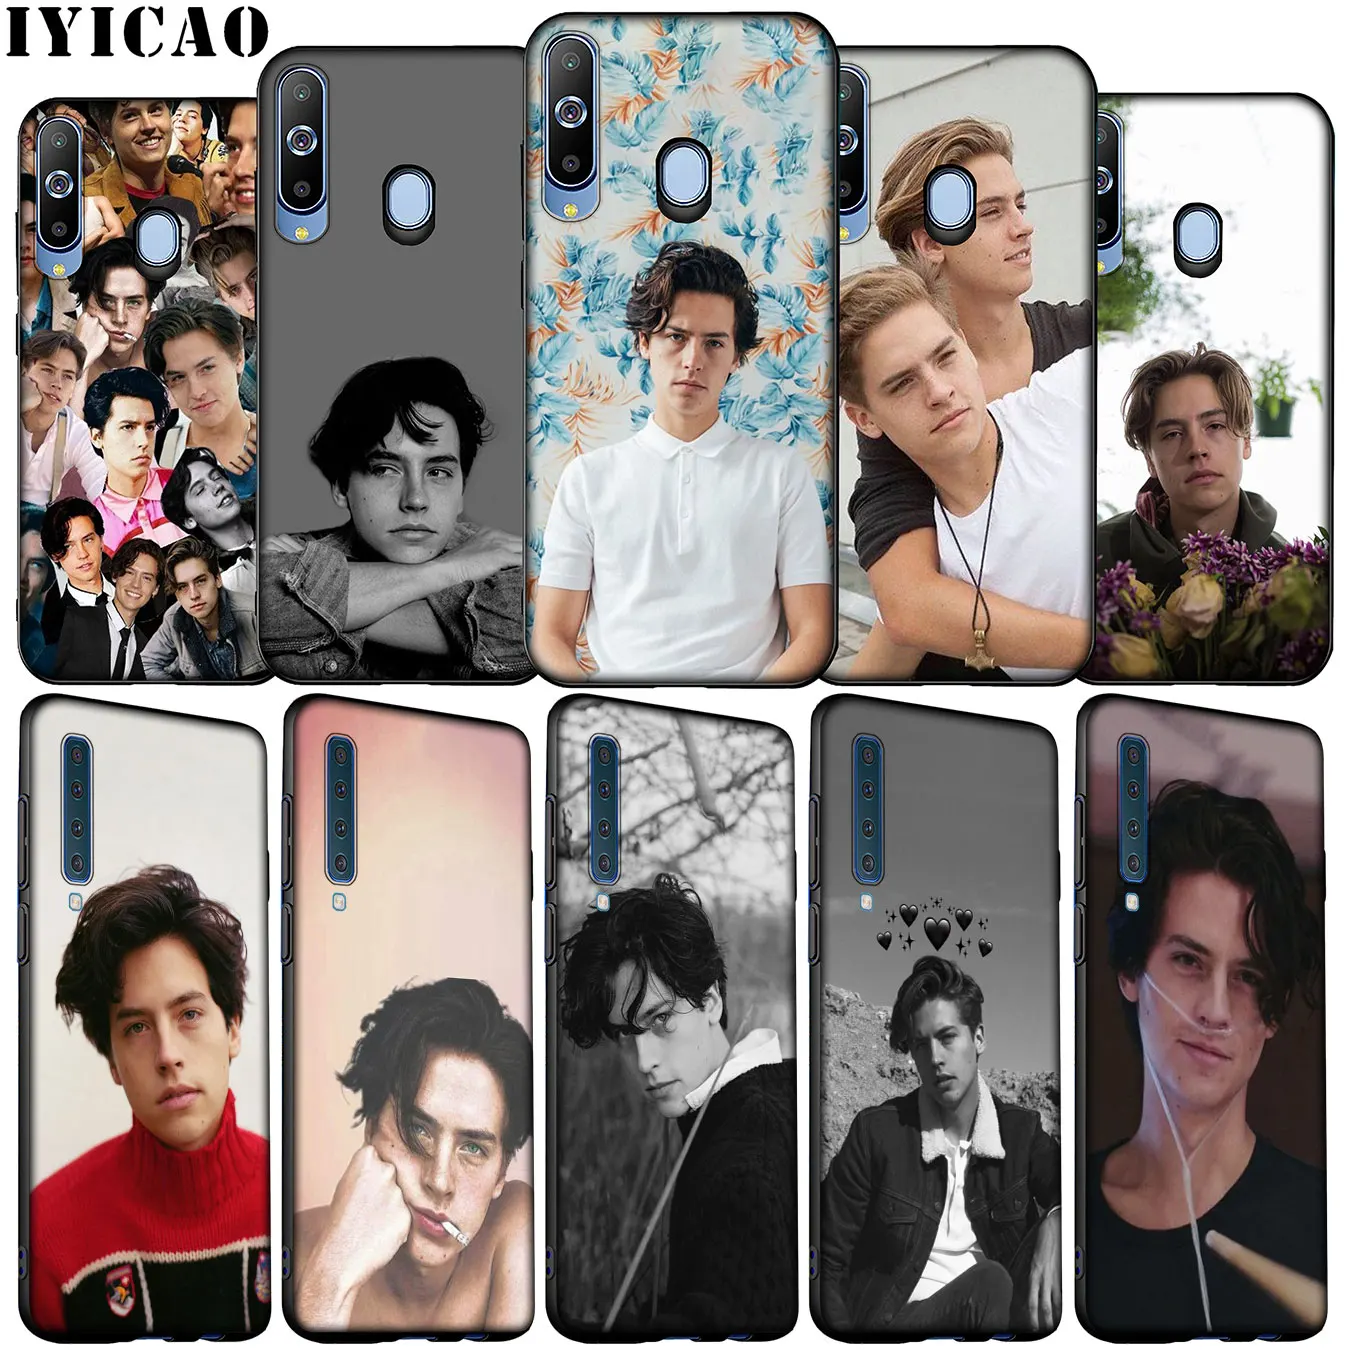 

IYICAO Cole Sprouse Soft Silicone Case for Samsung Galaxy A70 A50 A60 A40 A30 A20 A10 M10 M20 M30 M40 A20E Black TPU Phone Cover